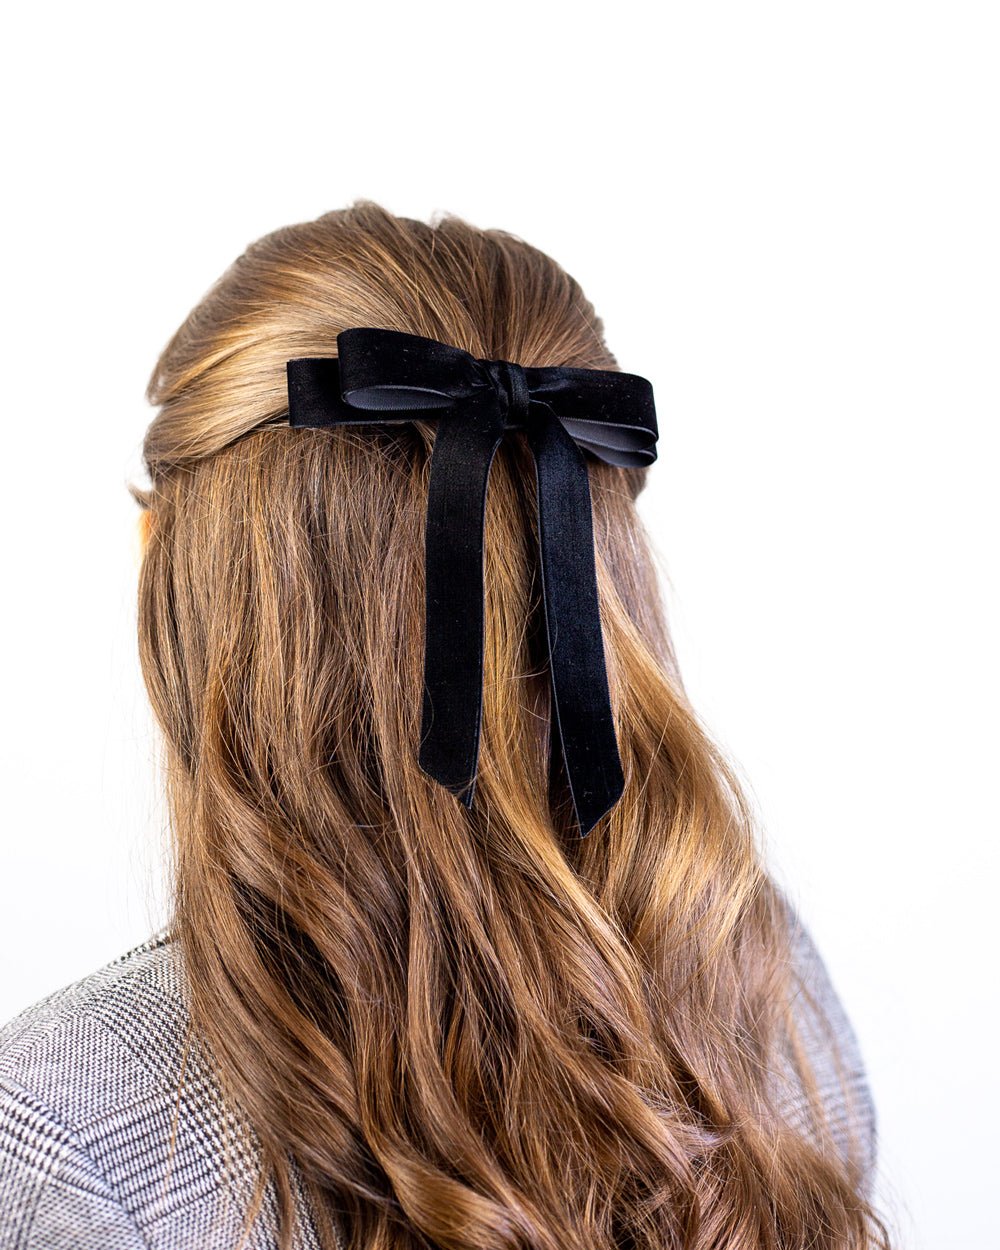 ALICE BLACK VELVET HAIR BOW - Shop Cupcakes and Cashmere